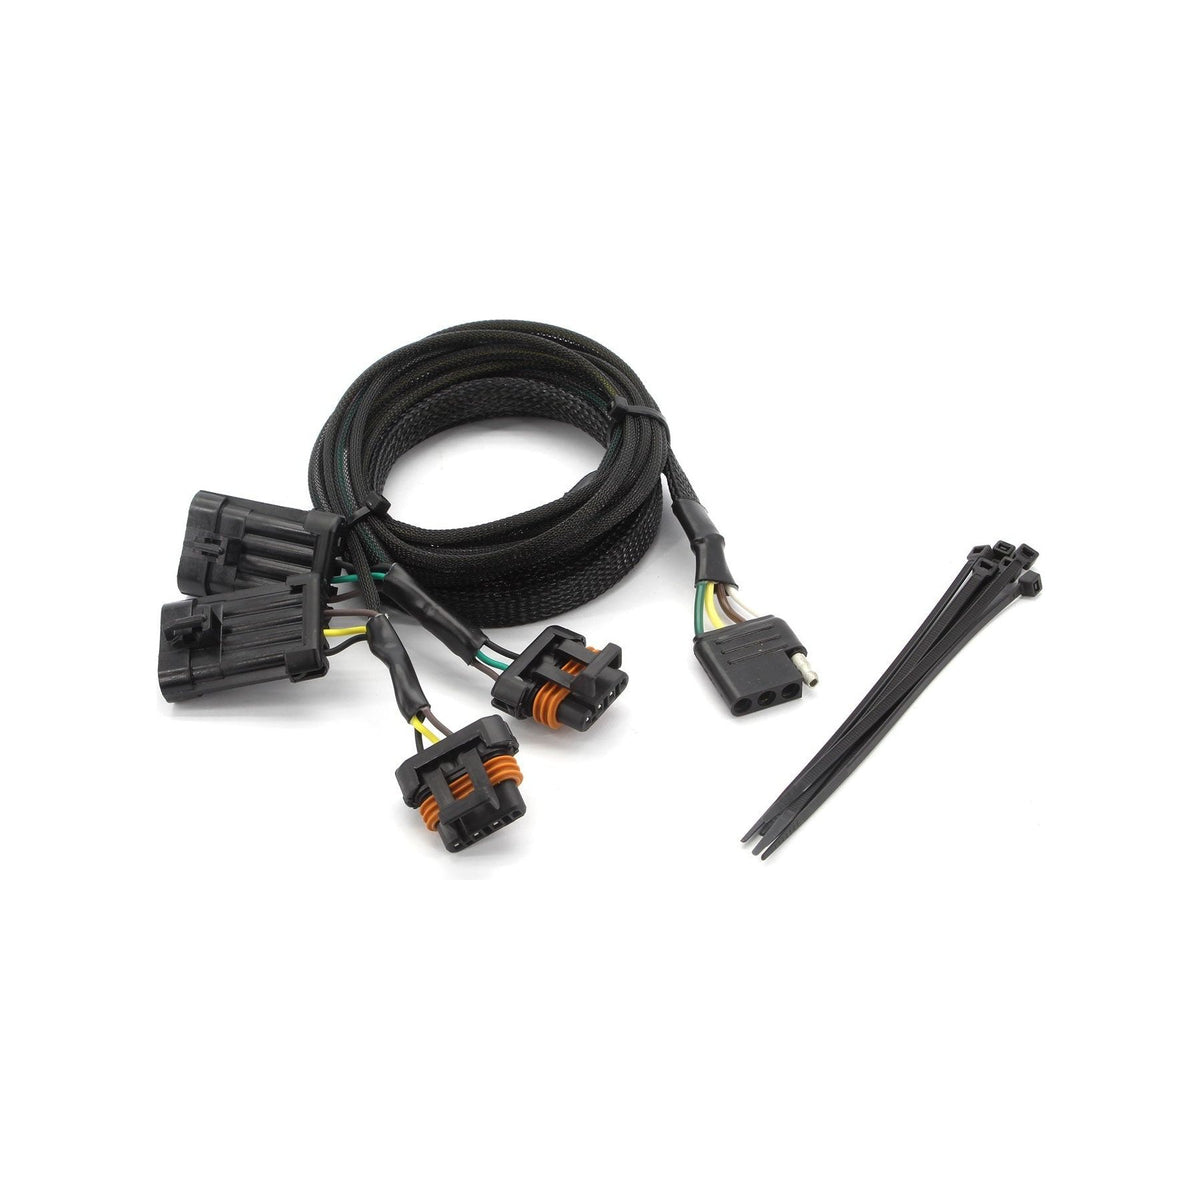 Polaris Ranger XD 1500 Plug and Play 4 Pin Trailer Light Adapter | XTC Power Products